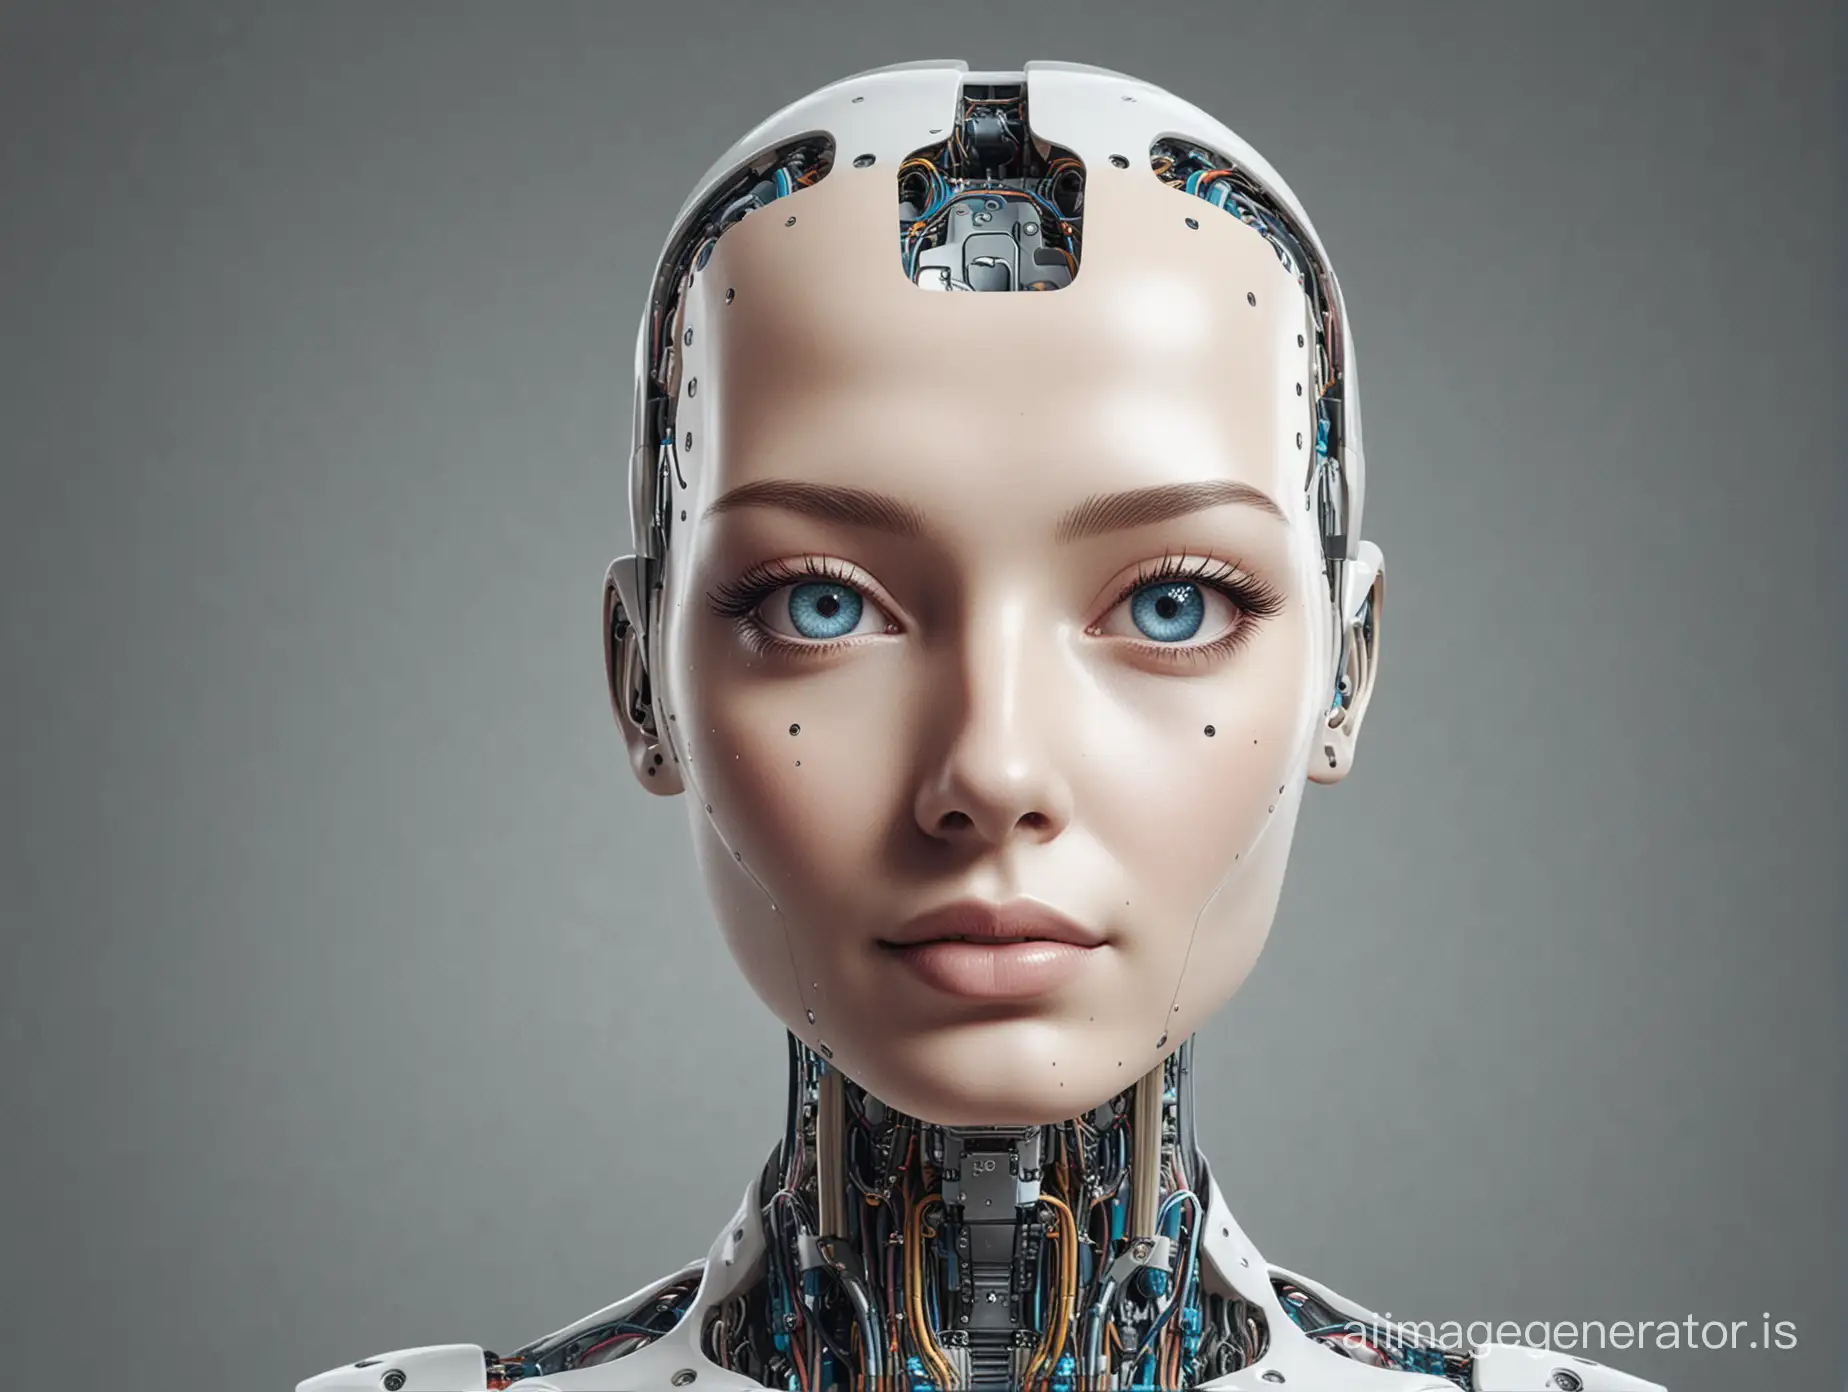 Futuristic-AI-Concept-Humanoid-Robot-Assimilating-with-Society